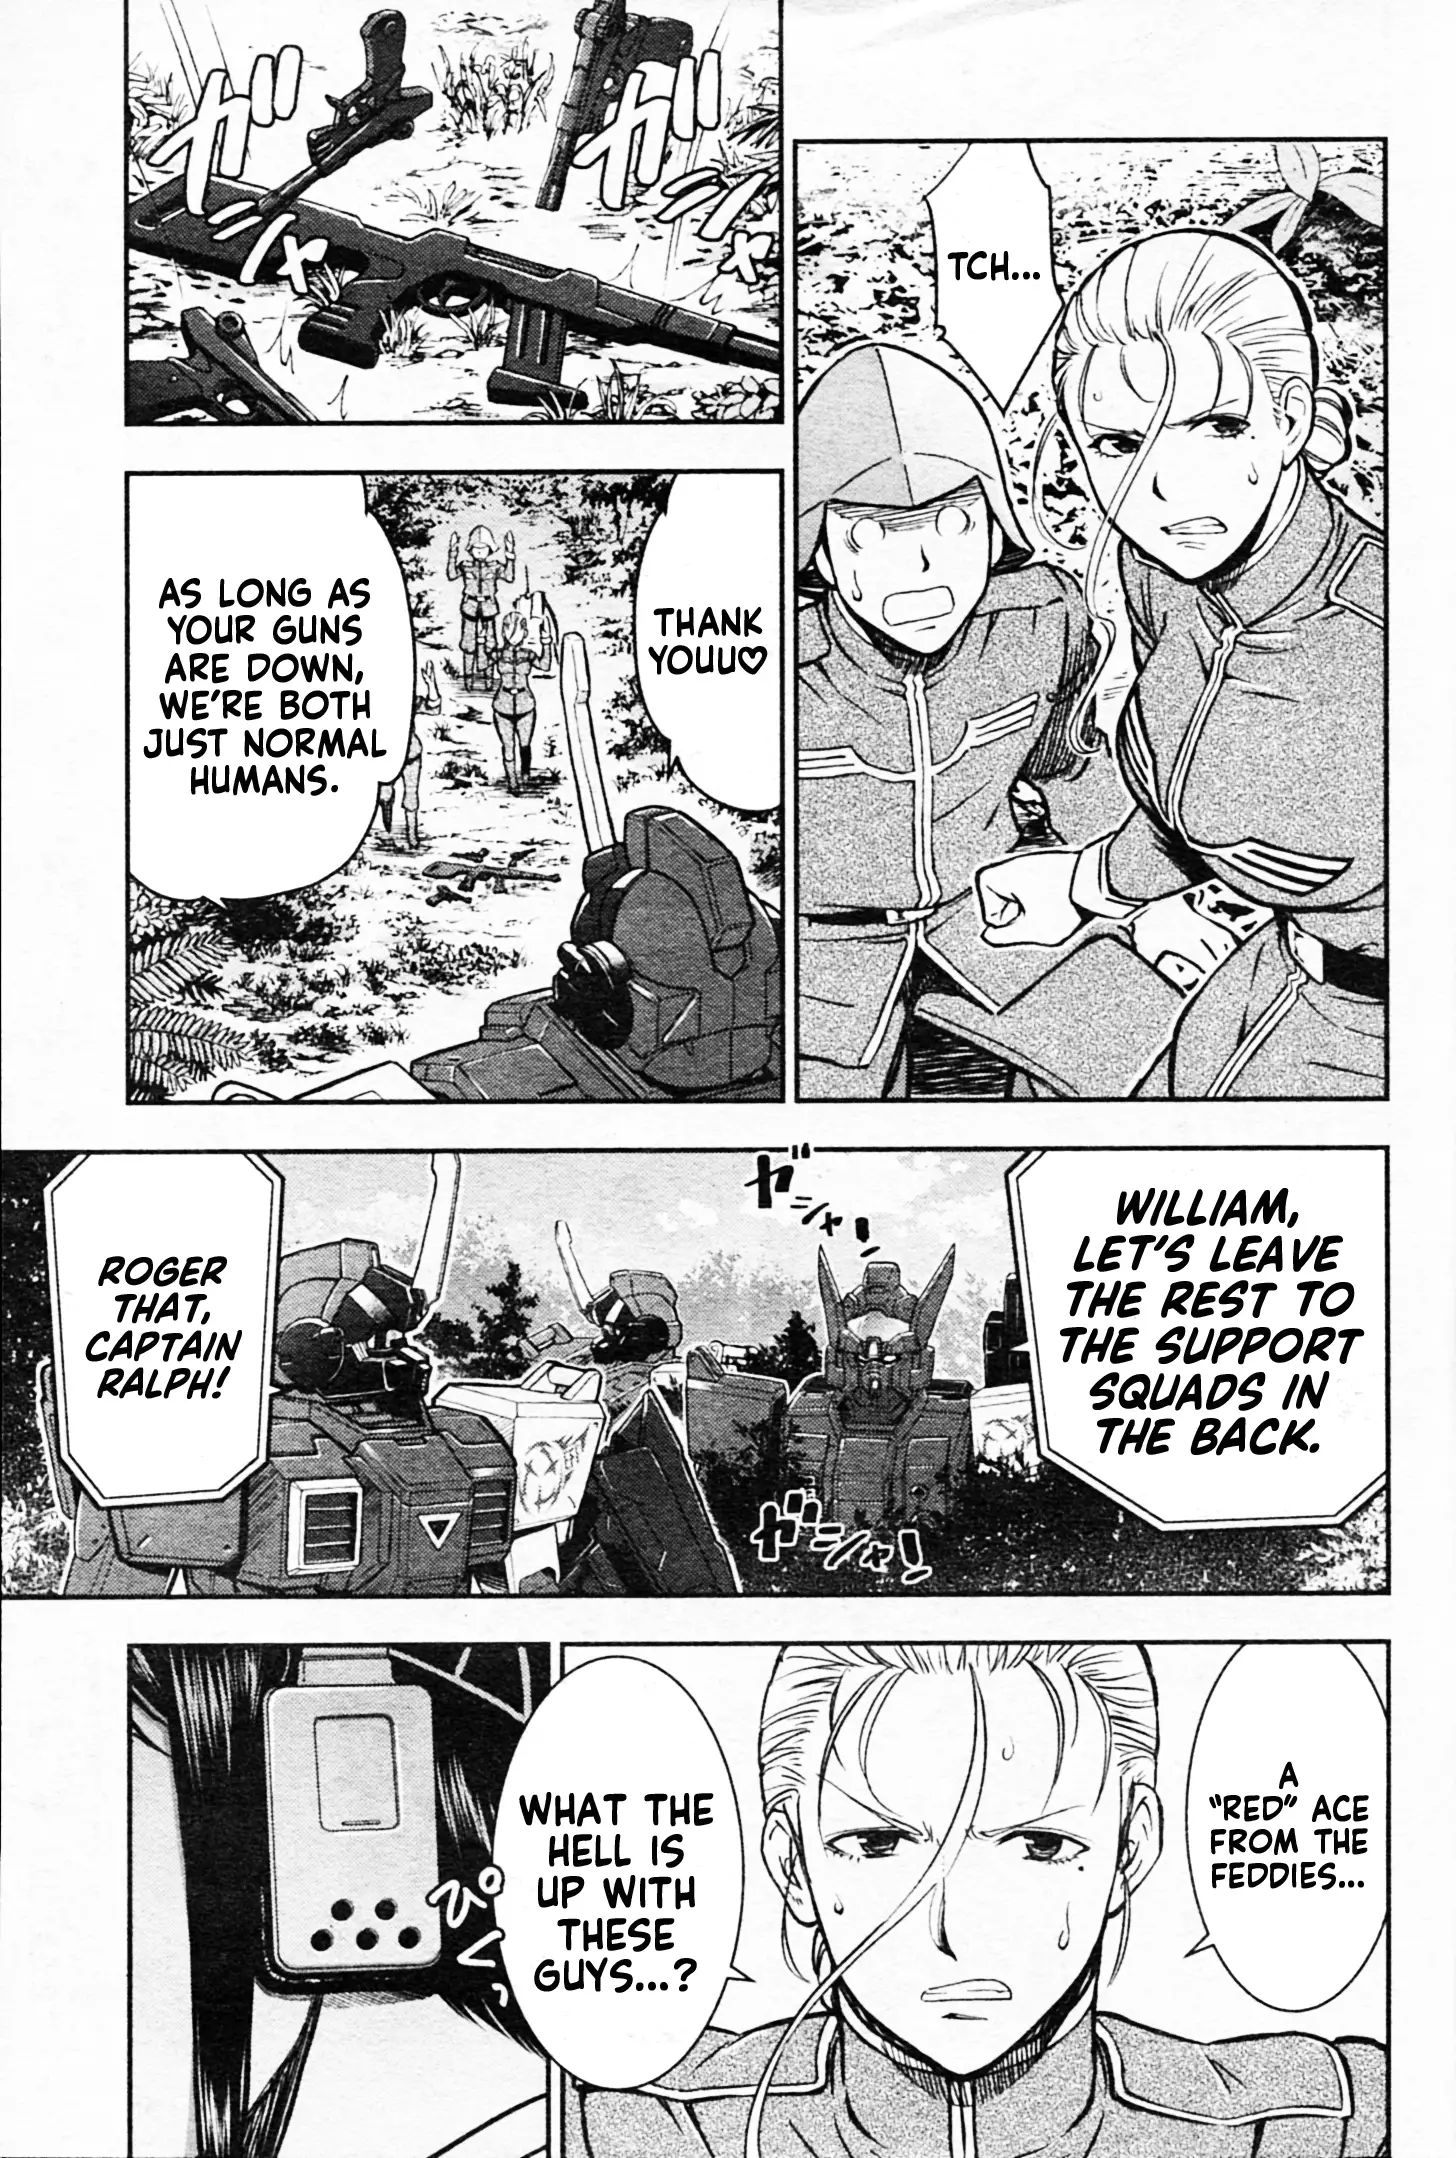 Mobile Suit Gundam: Red Giant 03Rd Ms Team - 1 page 22-b6e1b1d7